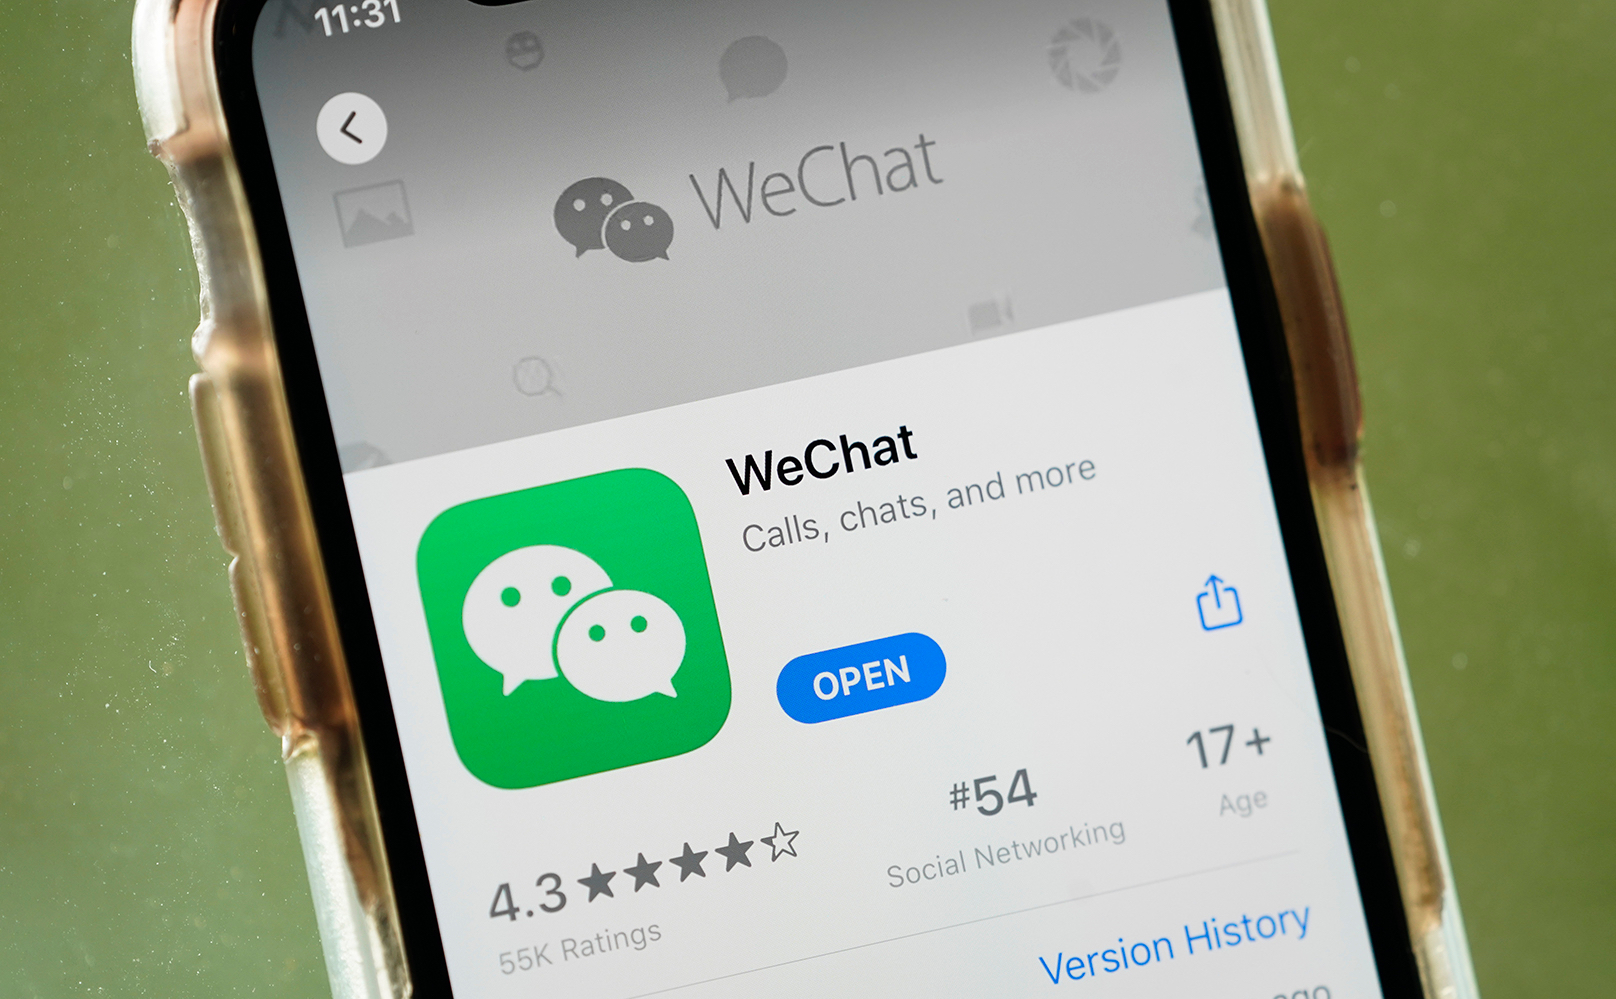 Chat we WeChat for